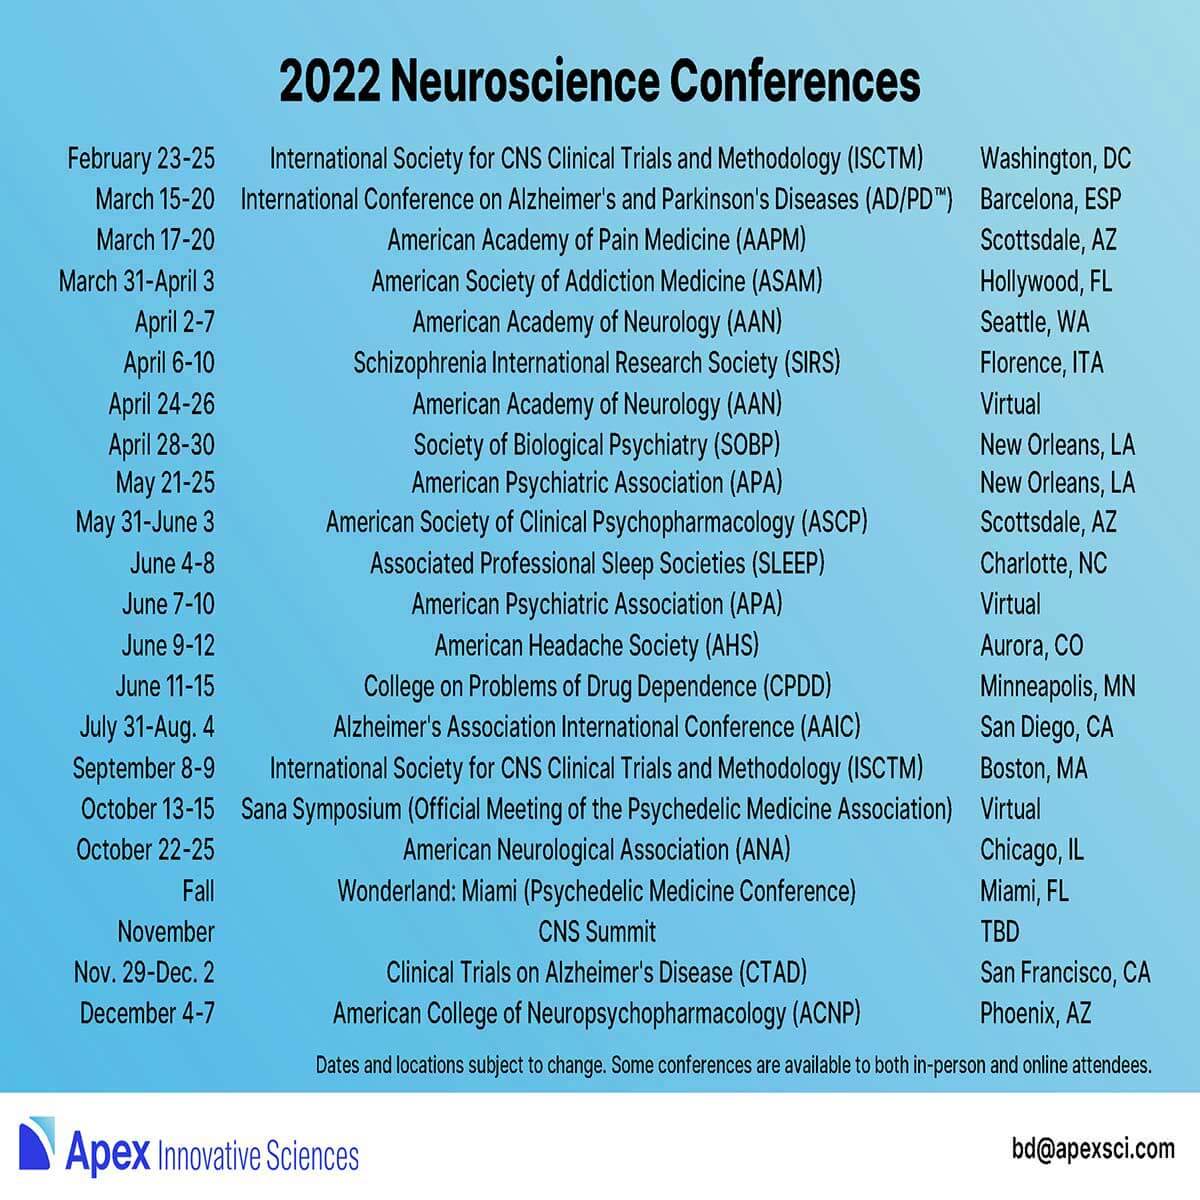 Featured image for post: 2022 Neuroscience Conference Date eCard